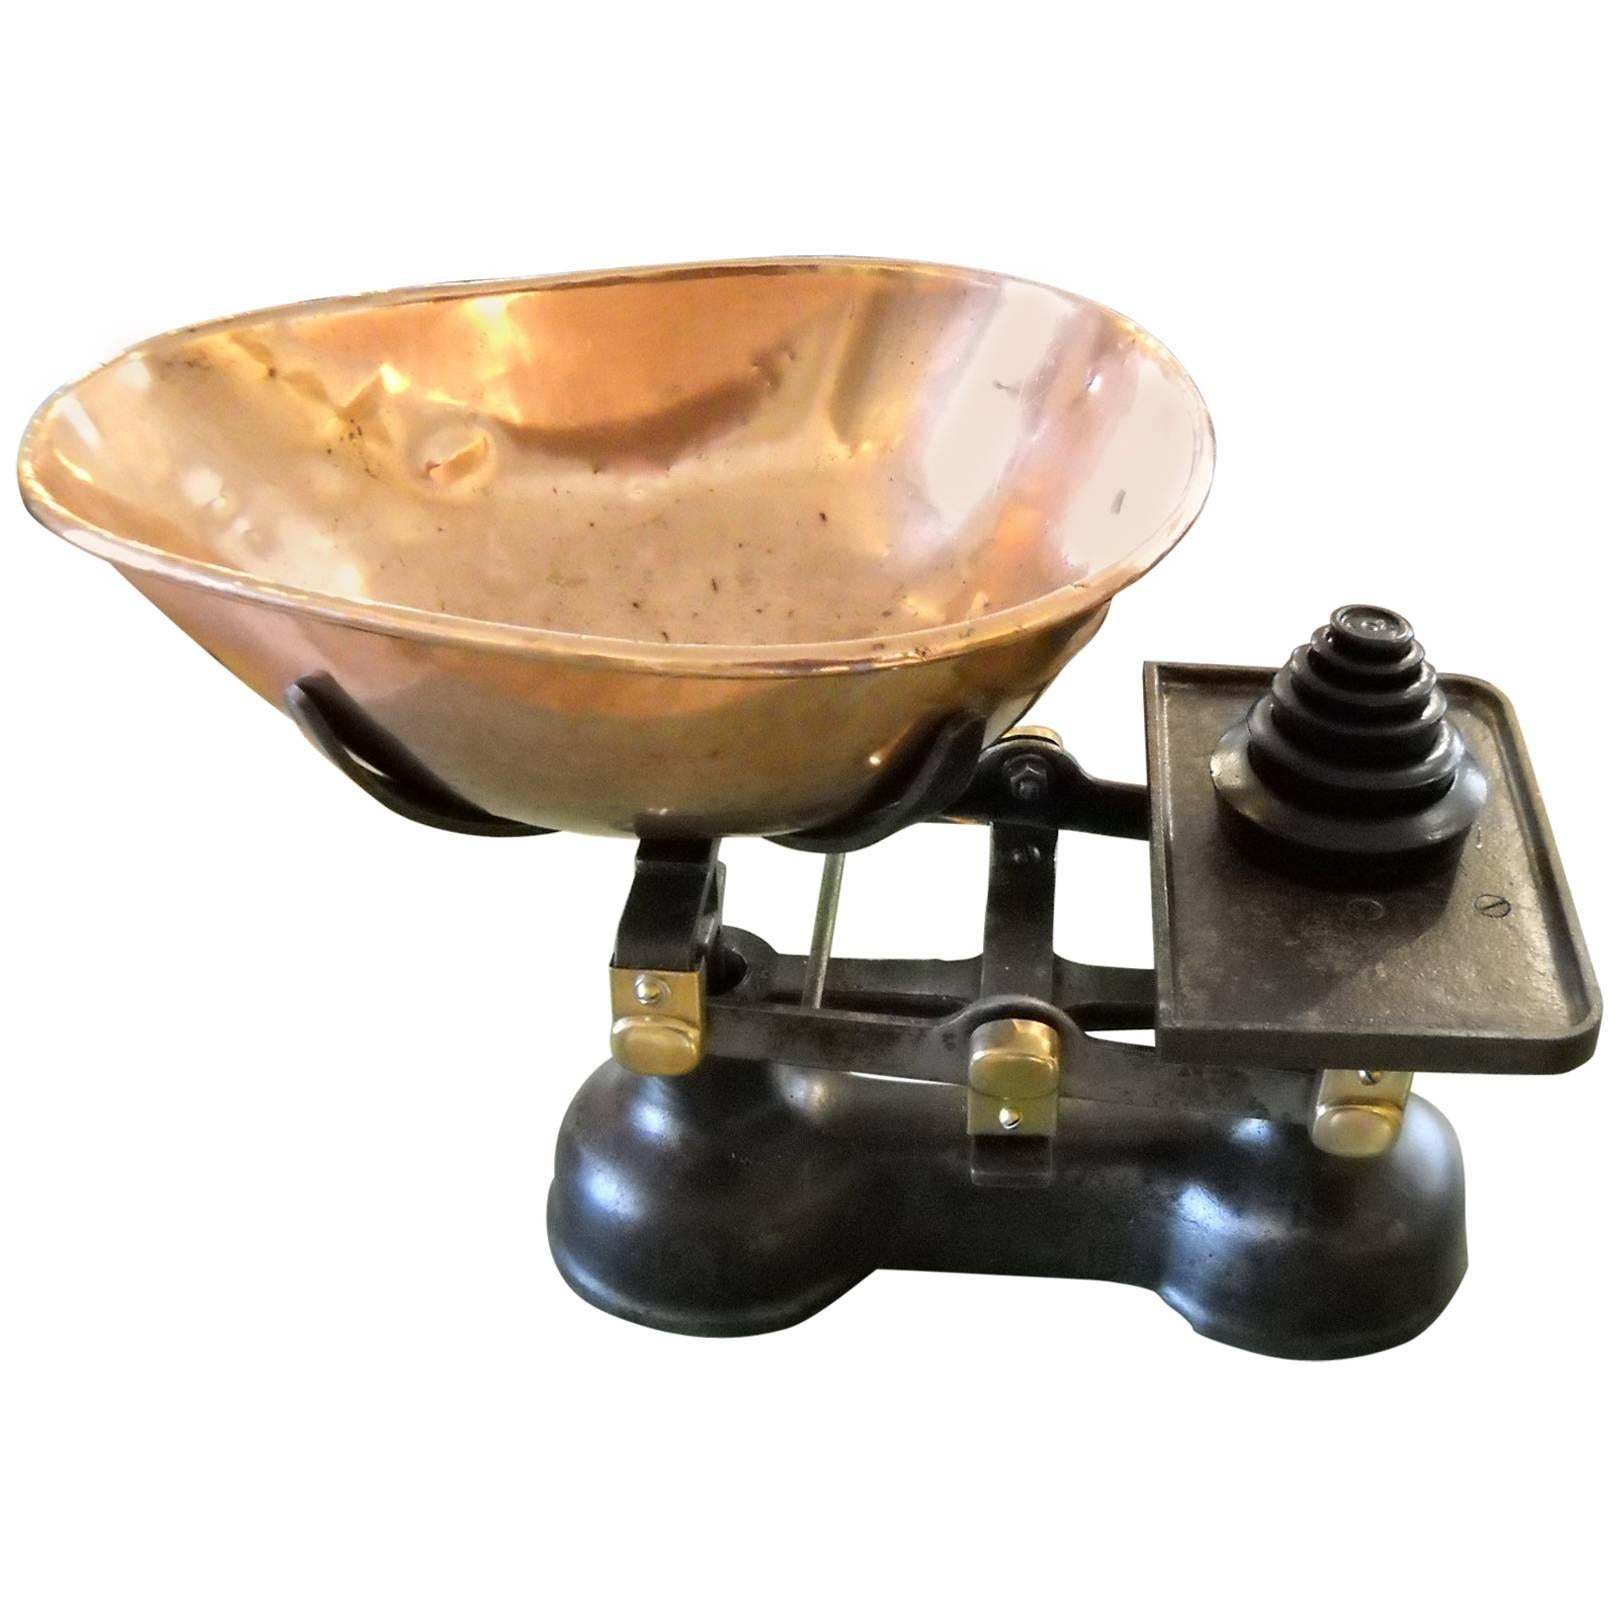 English Grocery Scale with Copper Tray